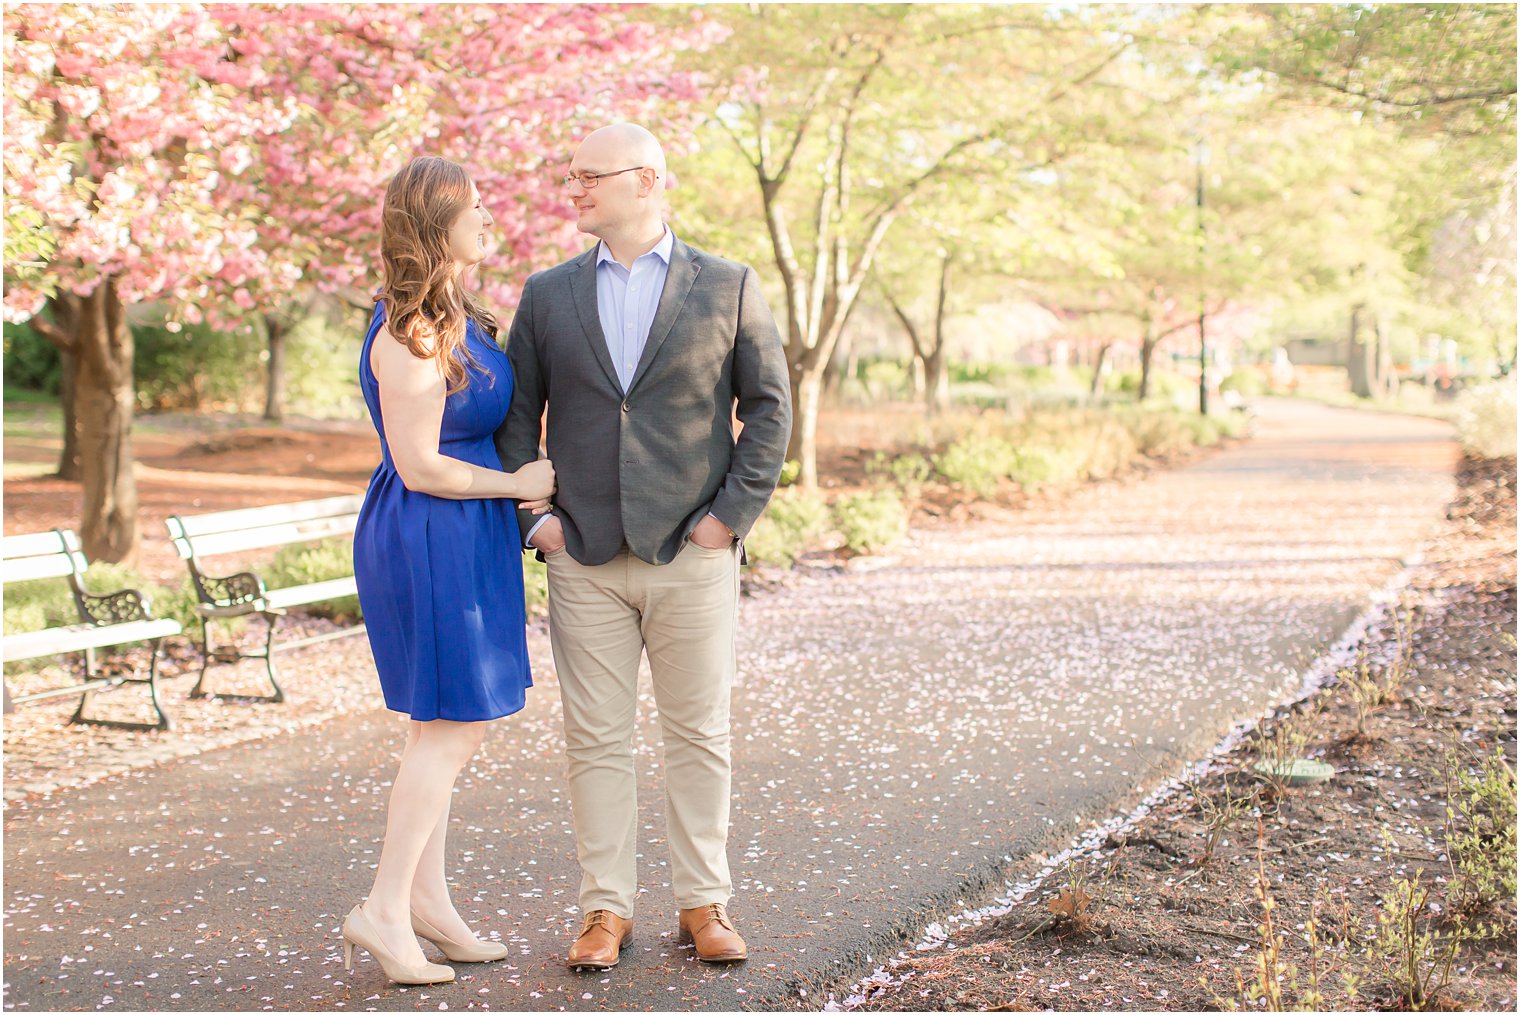 Engaged couple standing in a path among cherry blossoms at Branch Brook Park in Newark, NJ